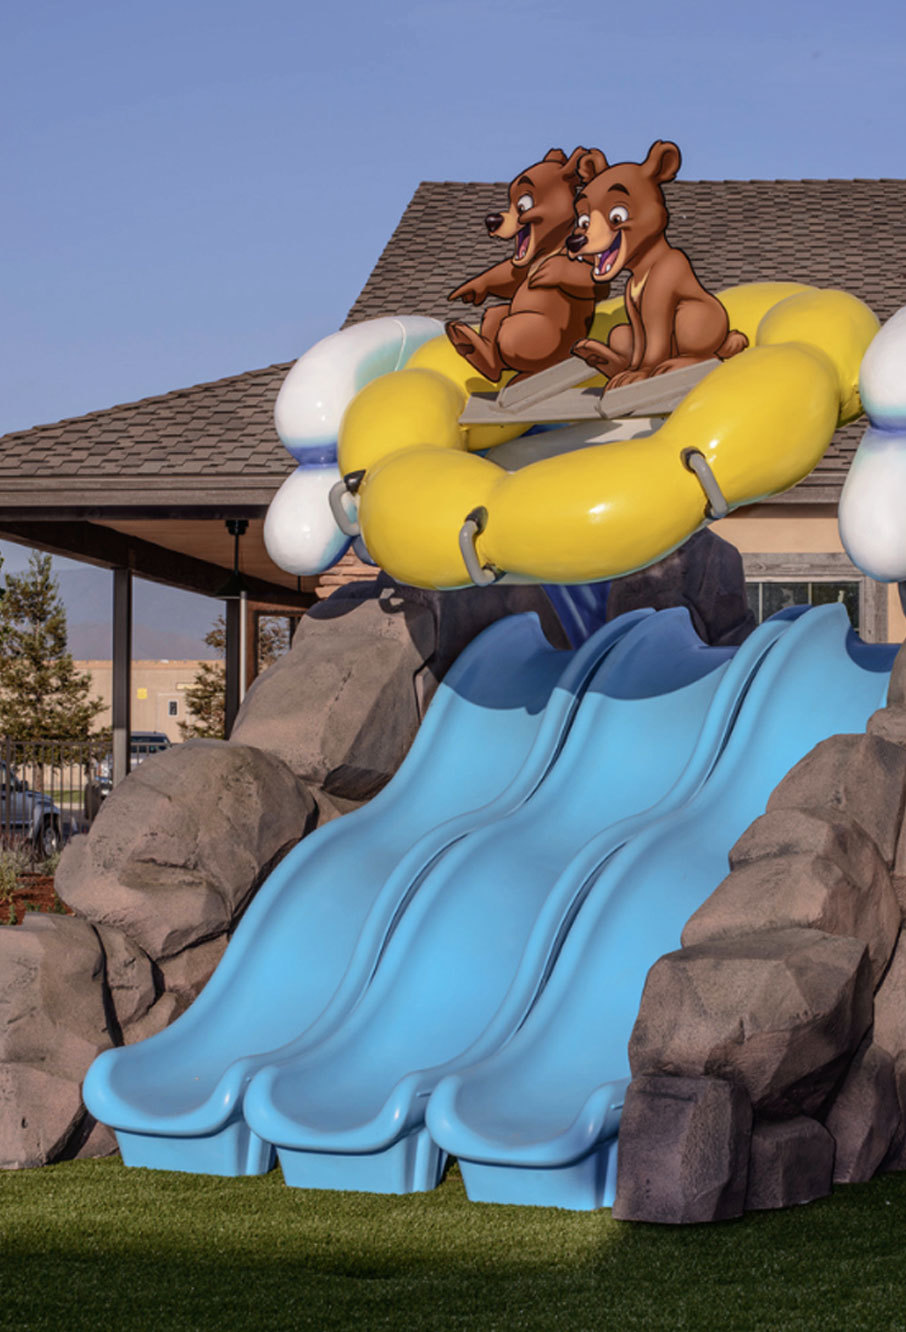 Triple blue slides on a 3D sculpted rocks base with bears in a yellow raft riding a wave as an outdoor play feature in a Camping Themed Environment at Canyon Hills Church